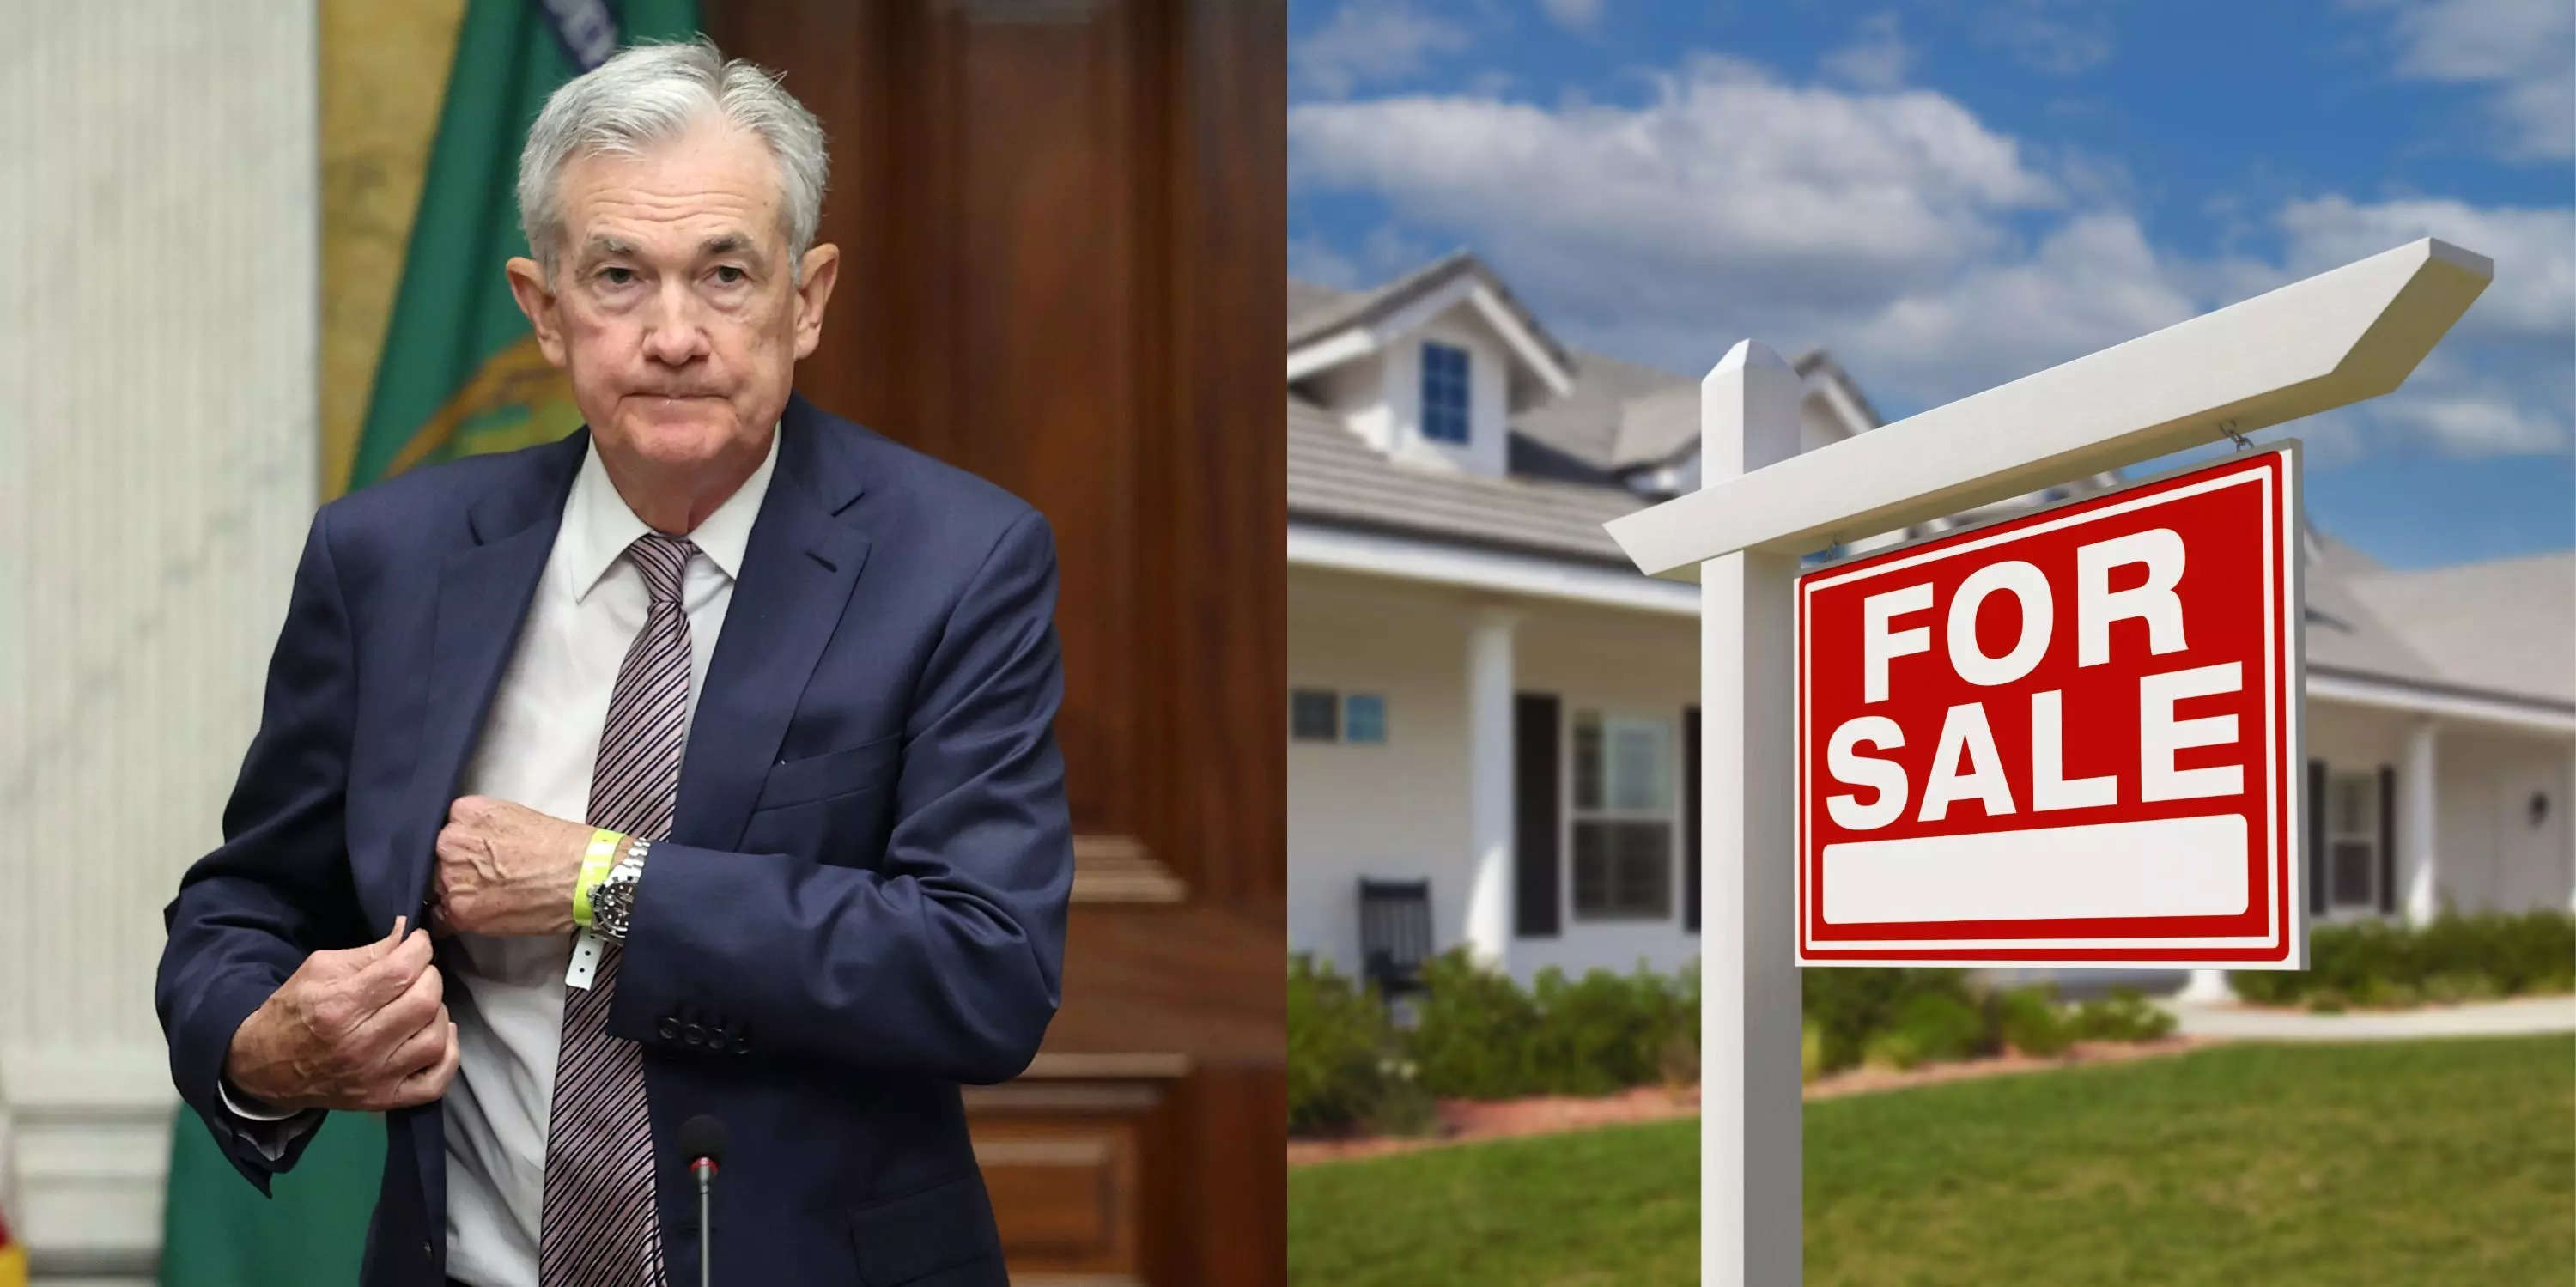 Home prices may pick up speed after the Fed cuts rates with 88% of the  housing market still overvalued, Fitch says